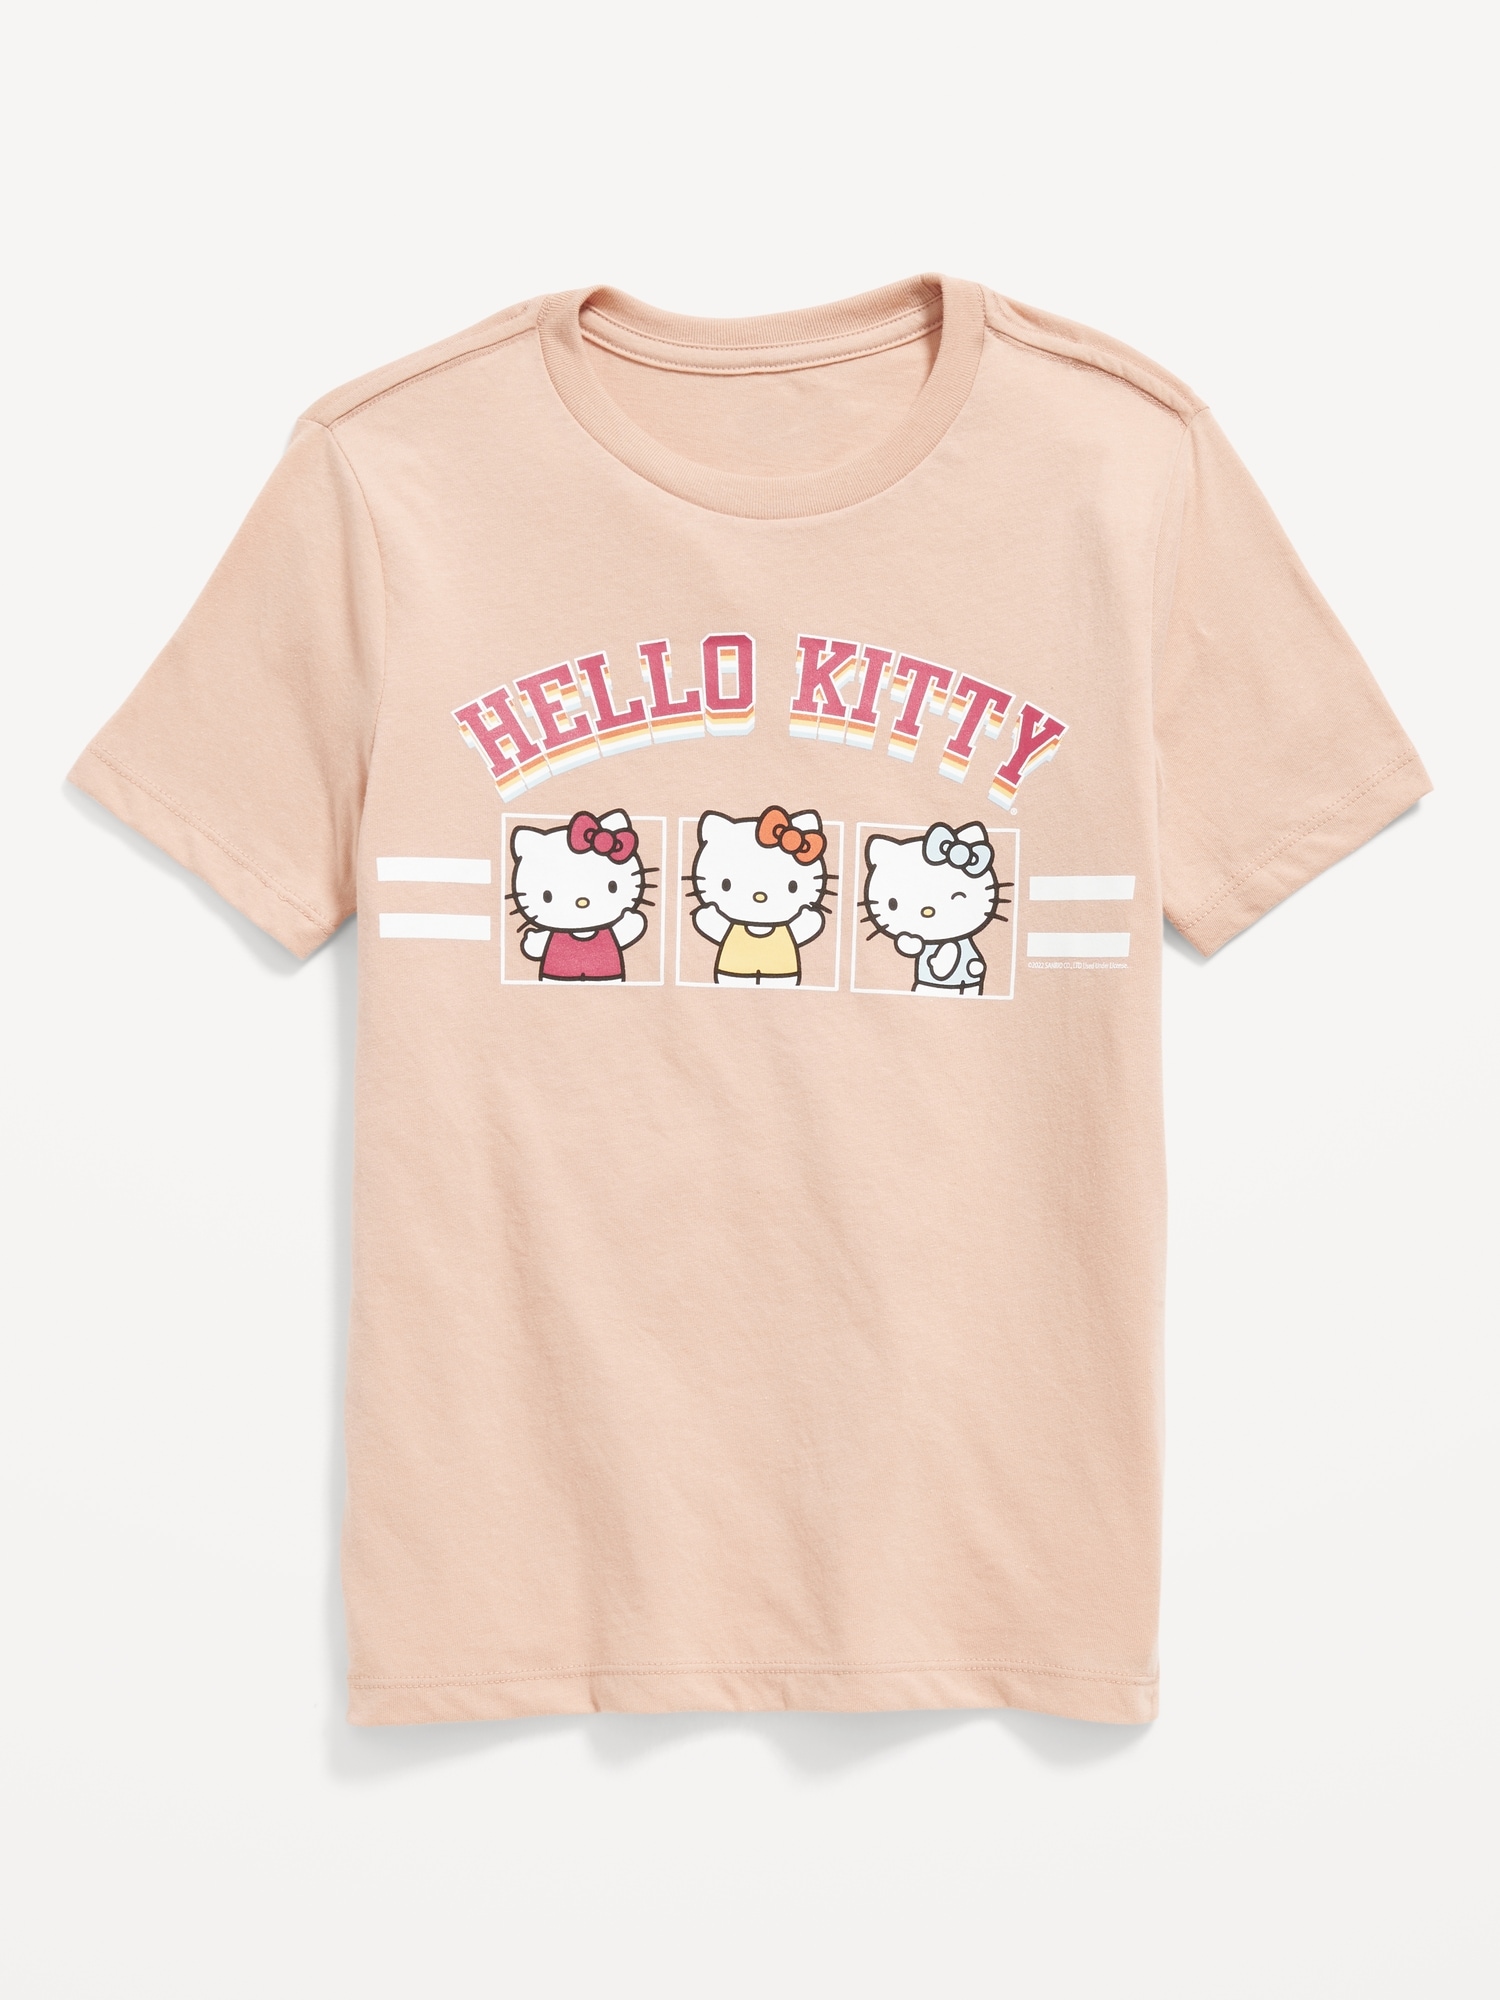 Hello Kitty® Gender-Neutral T-Shirt for Kids | Old Navy